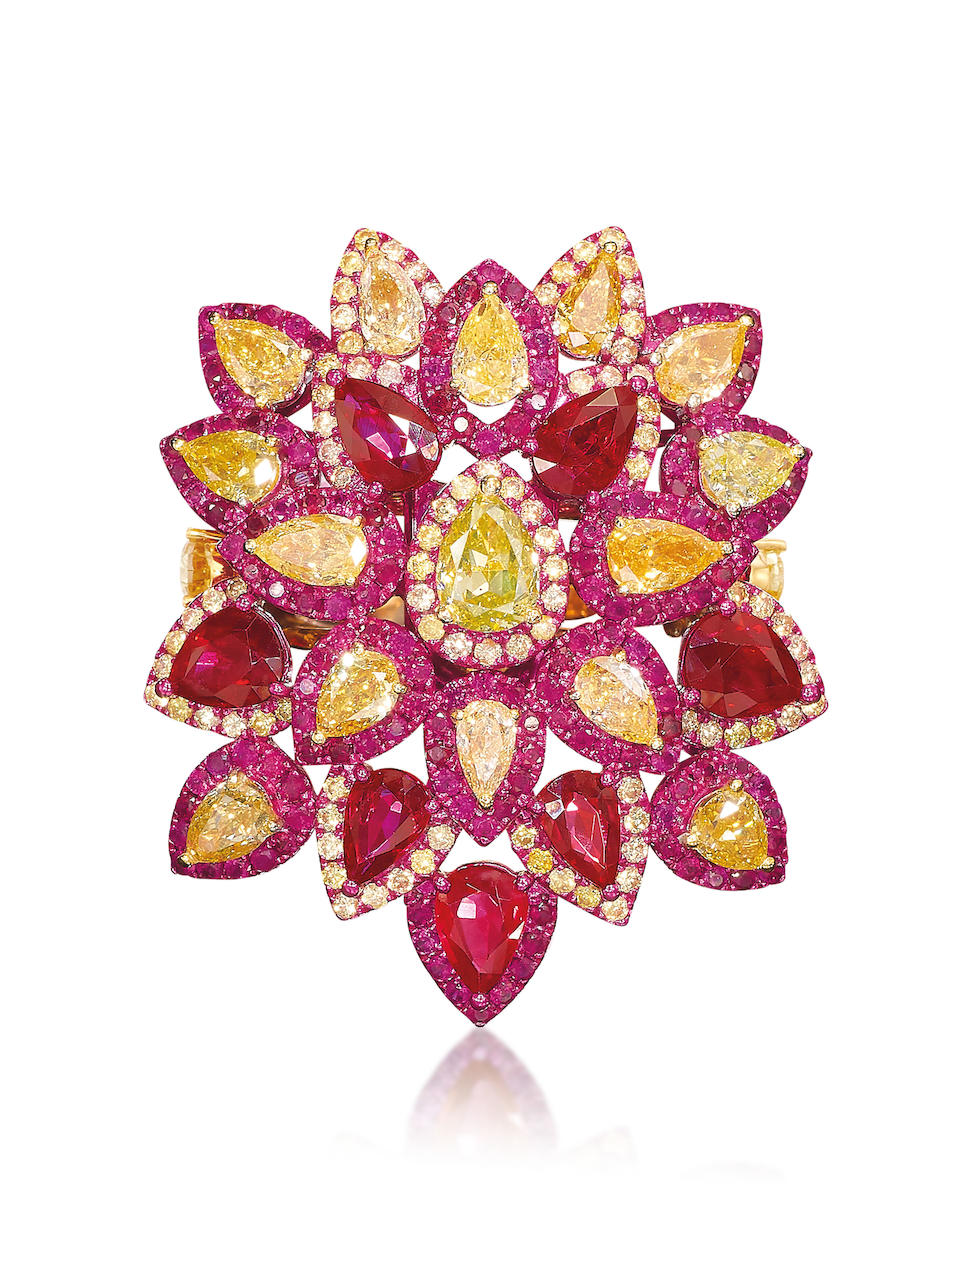 AUSTY LEE: RUBY AND COLOURED DIAMOND RING/ PENDANT